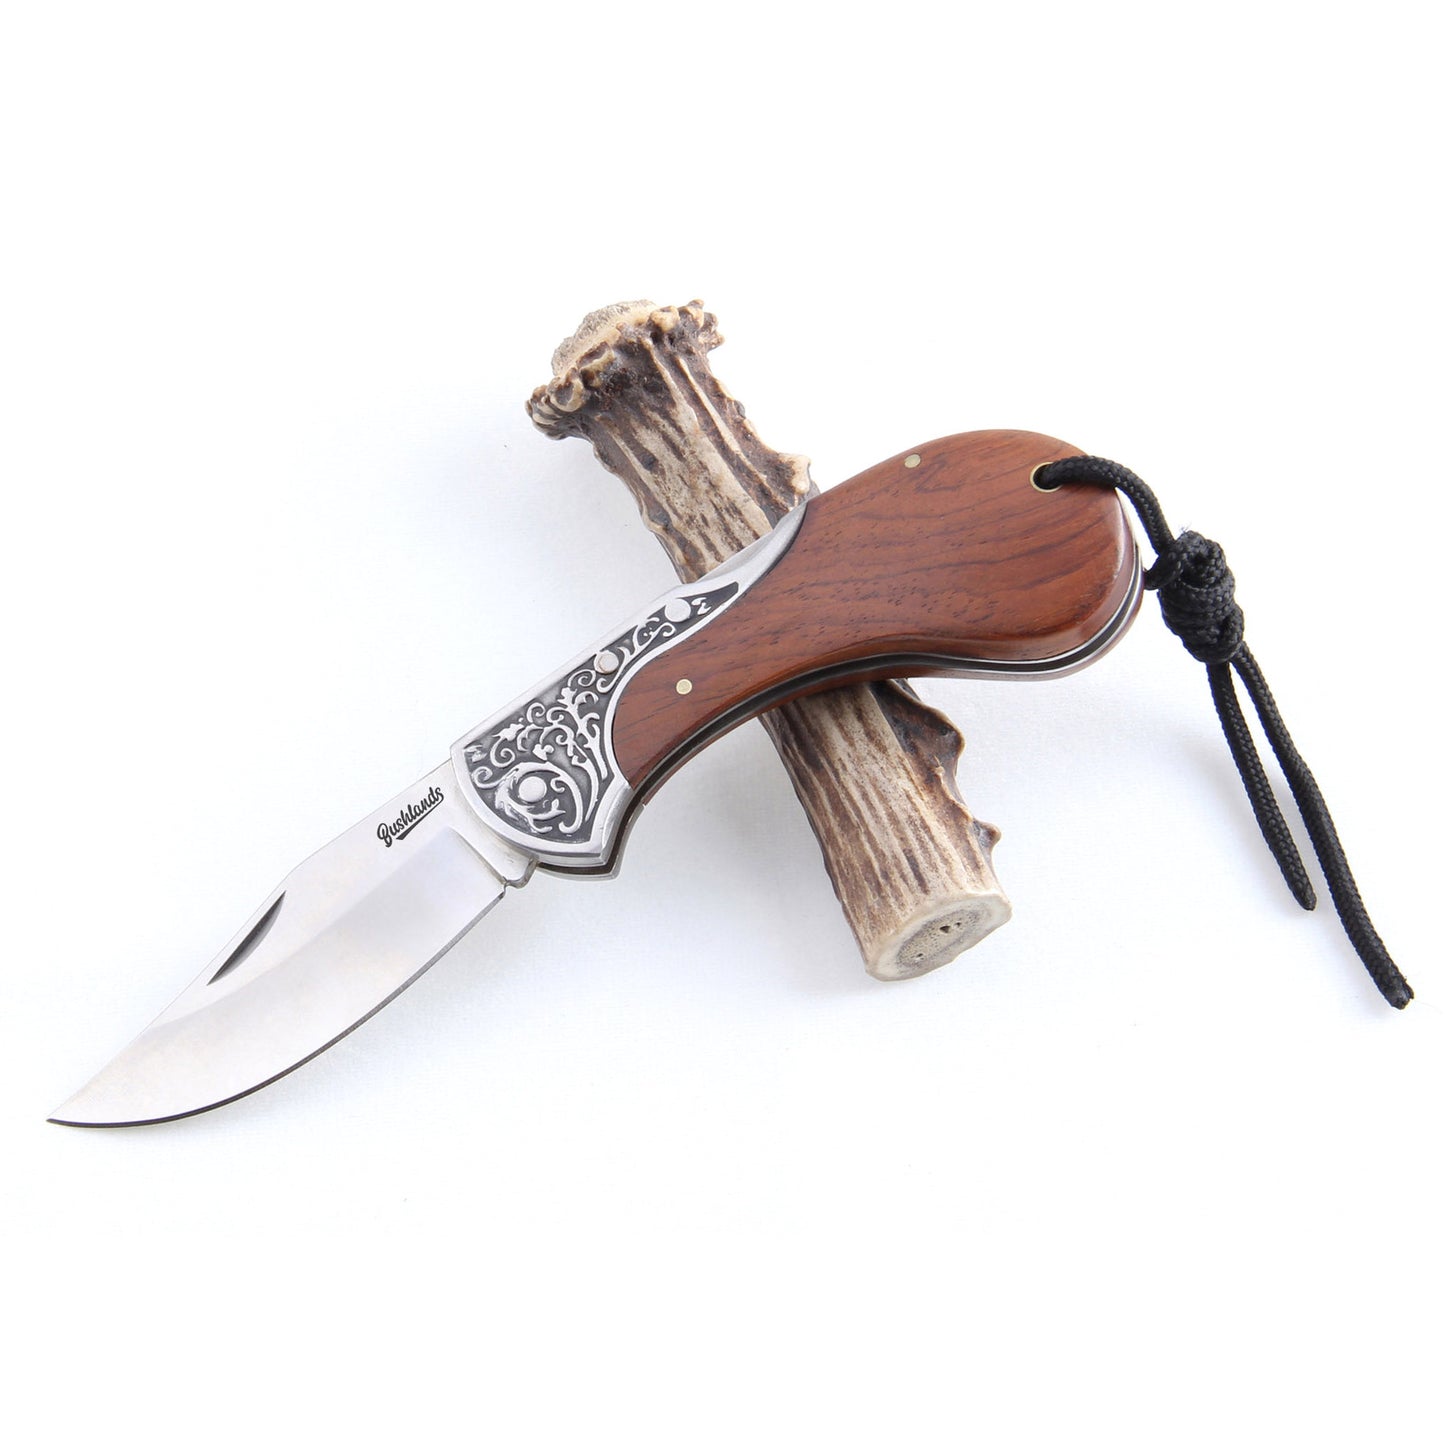 Bushlands Bushlands Classic Hunting Folding Knife - Stainless Steel Blade Rosewood Handle #fb0068 Dim Gray